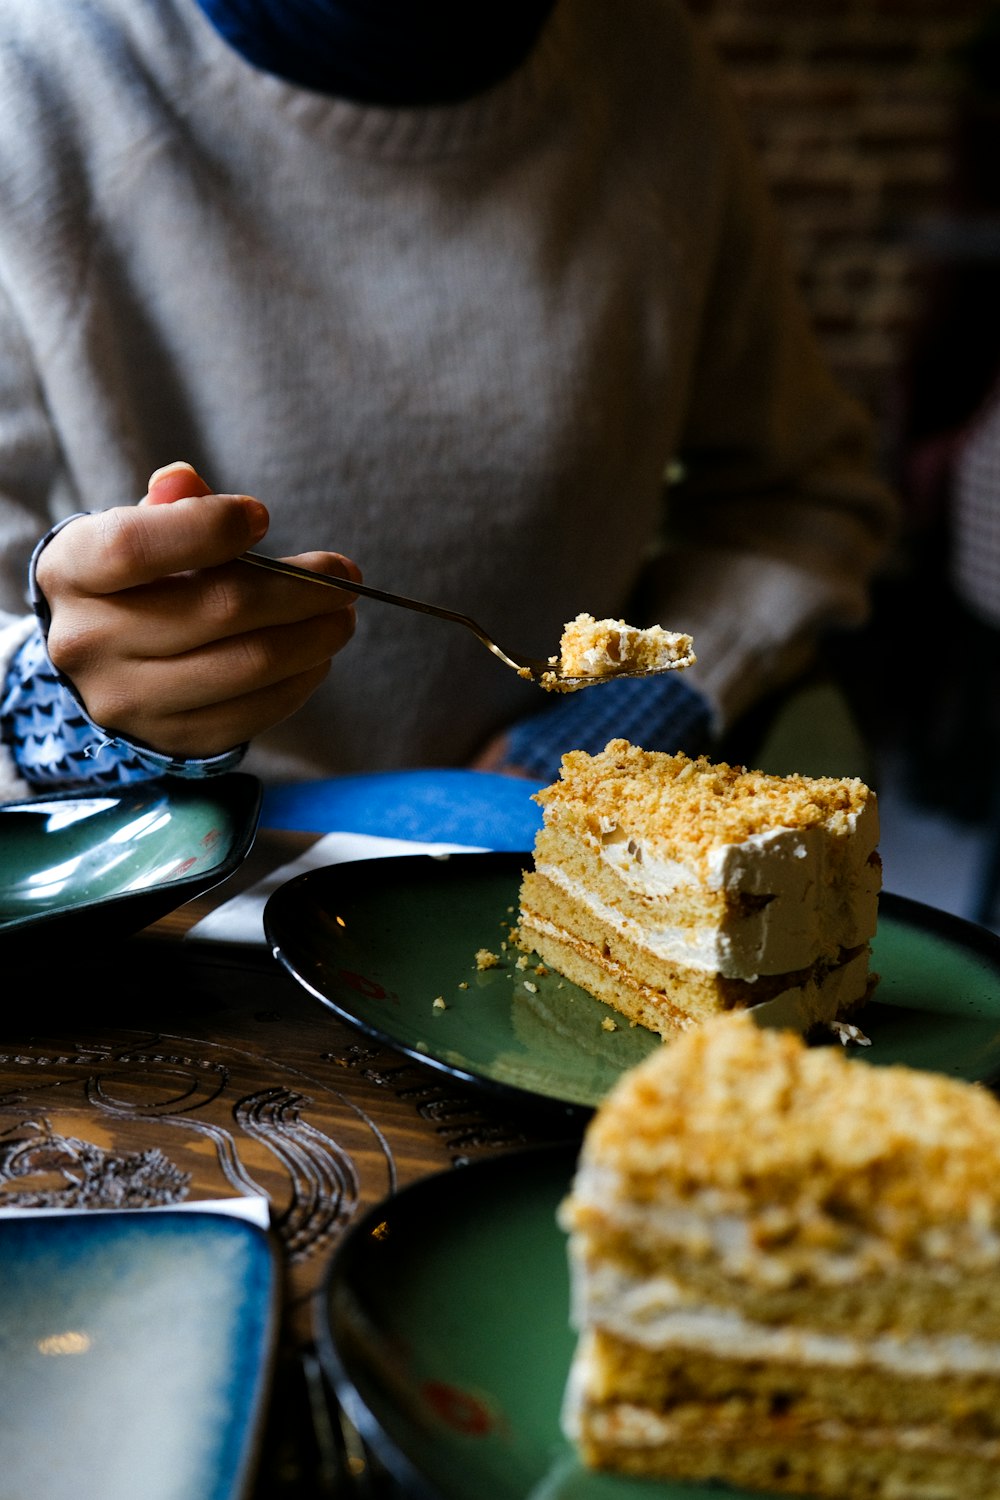 a person eating a piece of cake on a plate